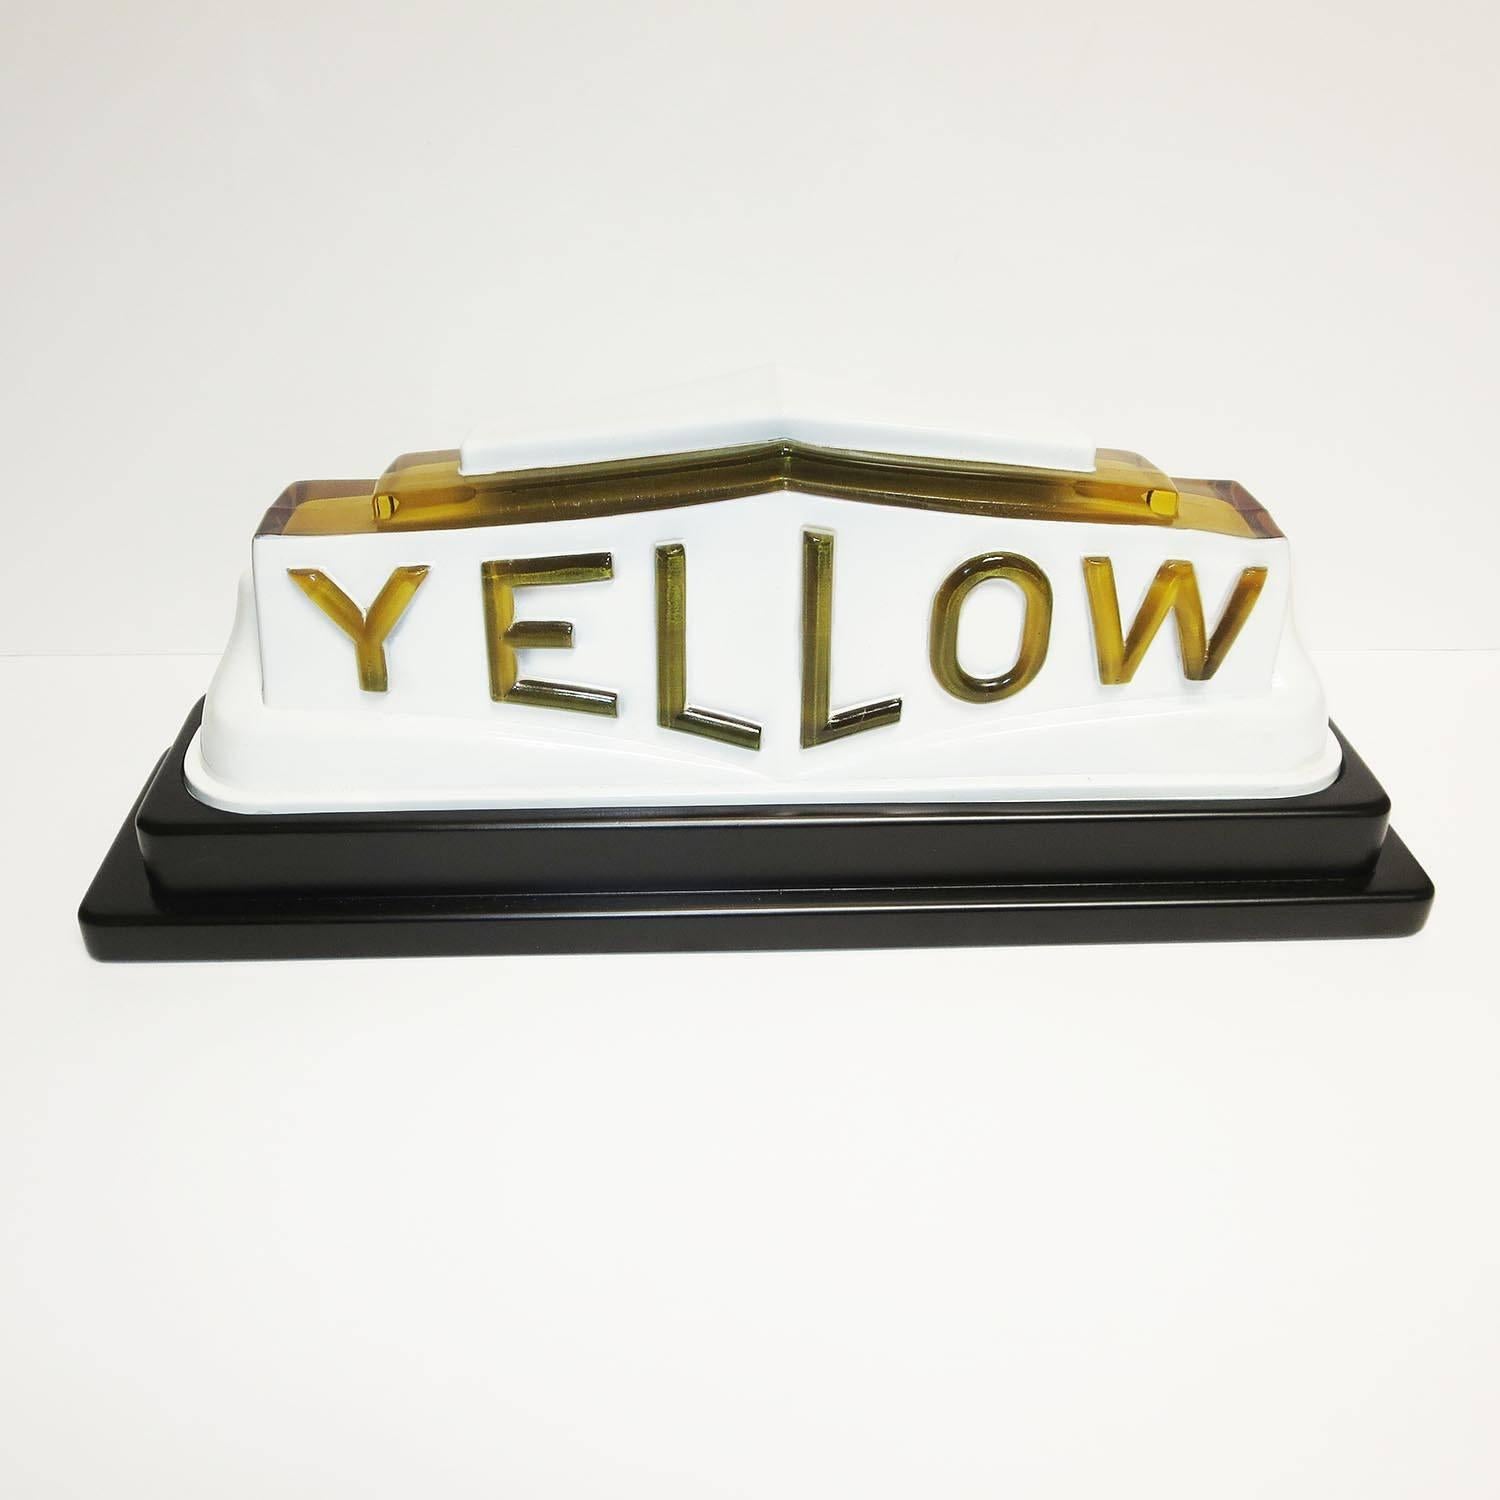 This rare and wonderful lighted sign mounted on top of a 1930s Yellow cab. It is one piece molded glass, with original baked enameling. We have created a satin lacquered wooden base with lights inside for display. These are extremely difficult to